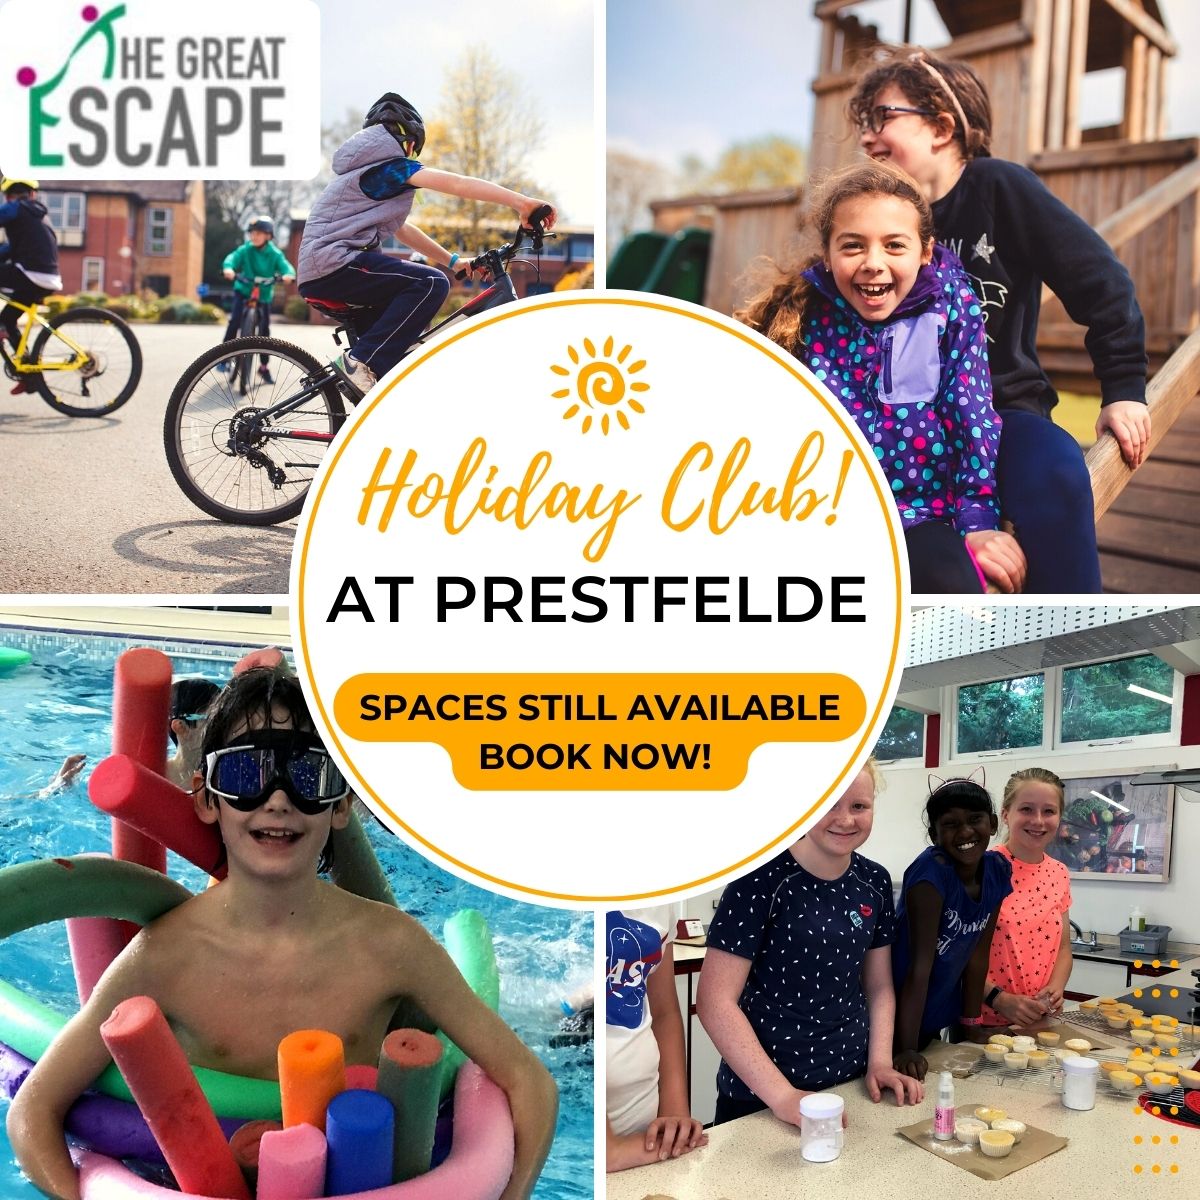 Prestfelde children are having a ball at Holiday Club this week and looking forward to the Big Camp Out next week. We still have spaces available, so if your child would like to come along and join in, please book via Mrs. Brittleton -hbrittleton@prestfelde.co.uk